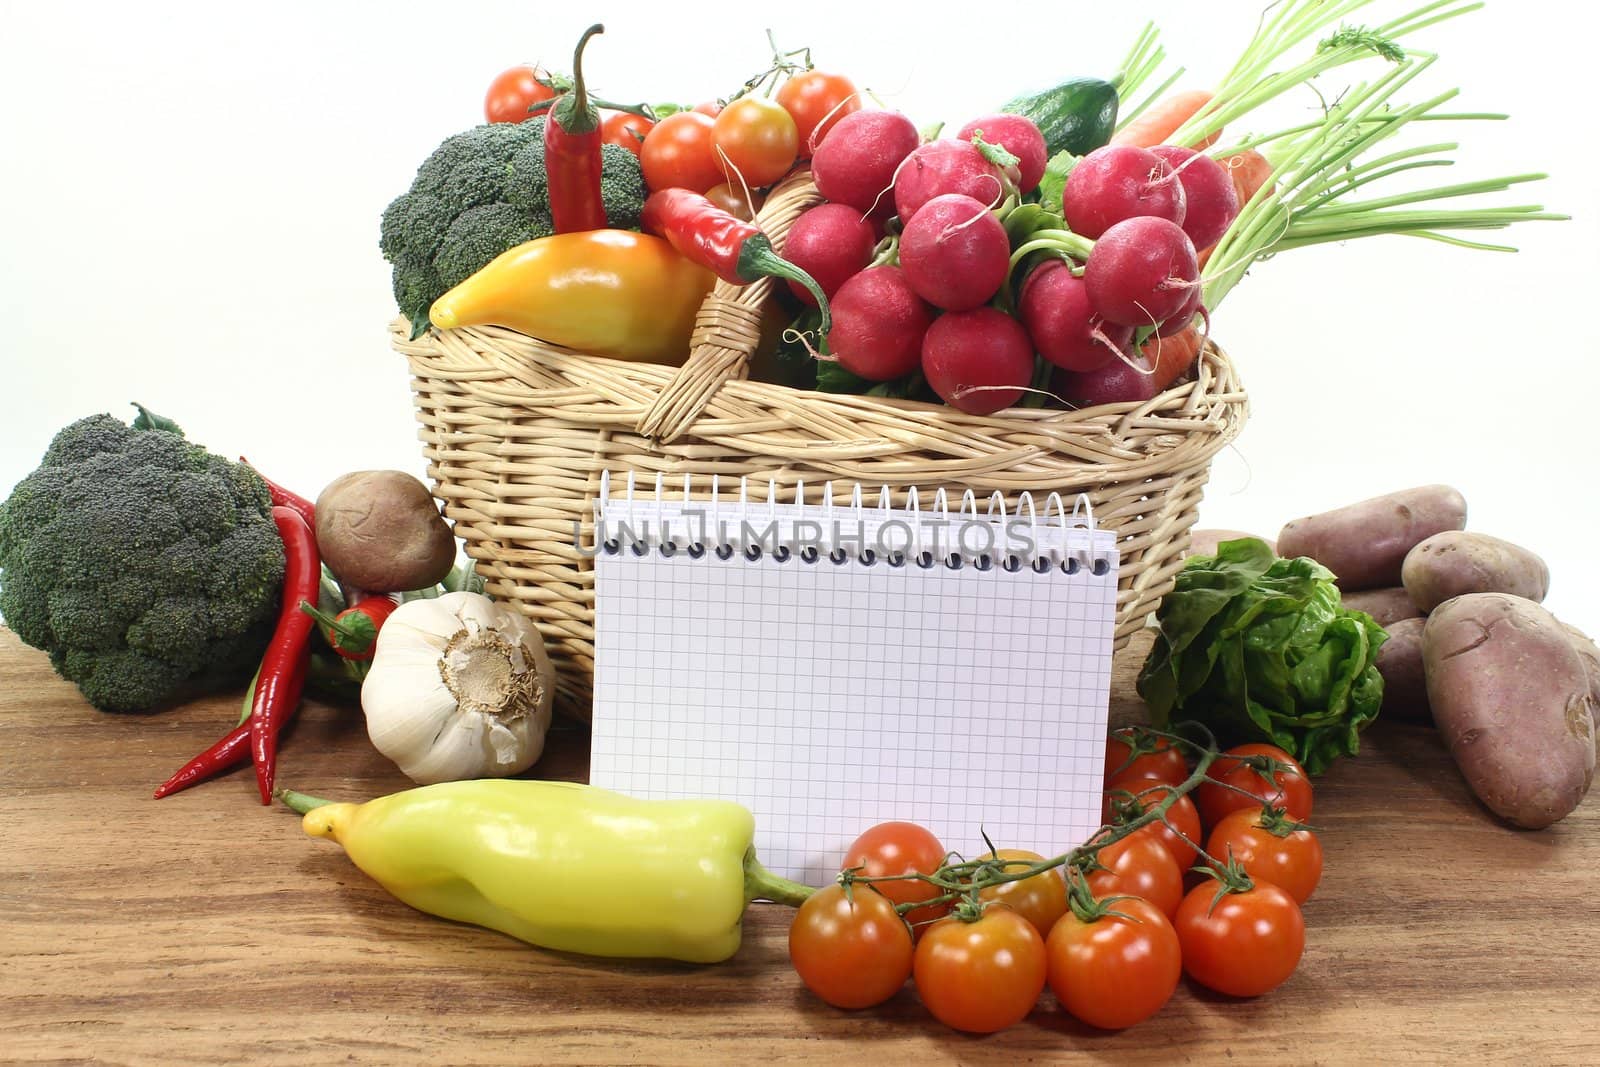 plaid shopping list with vegetables in a basket on wooden ground